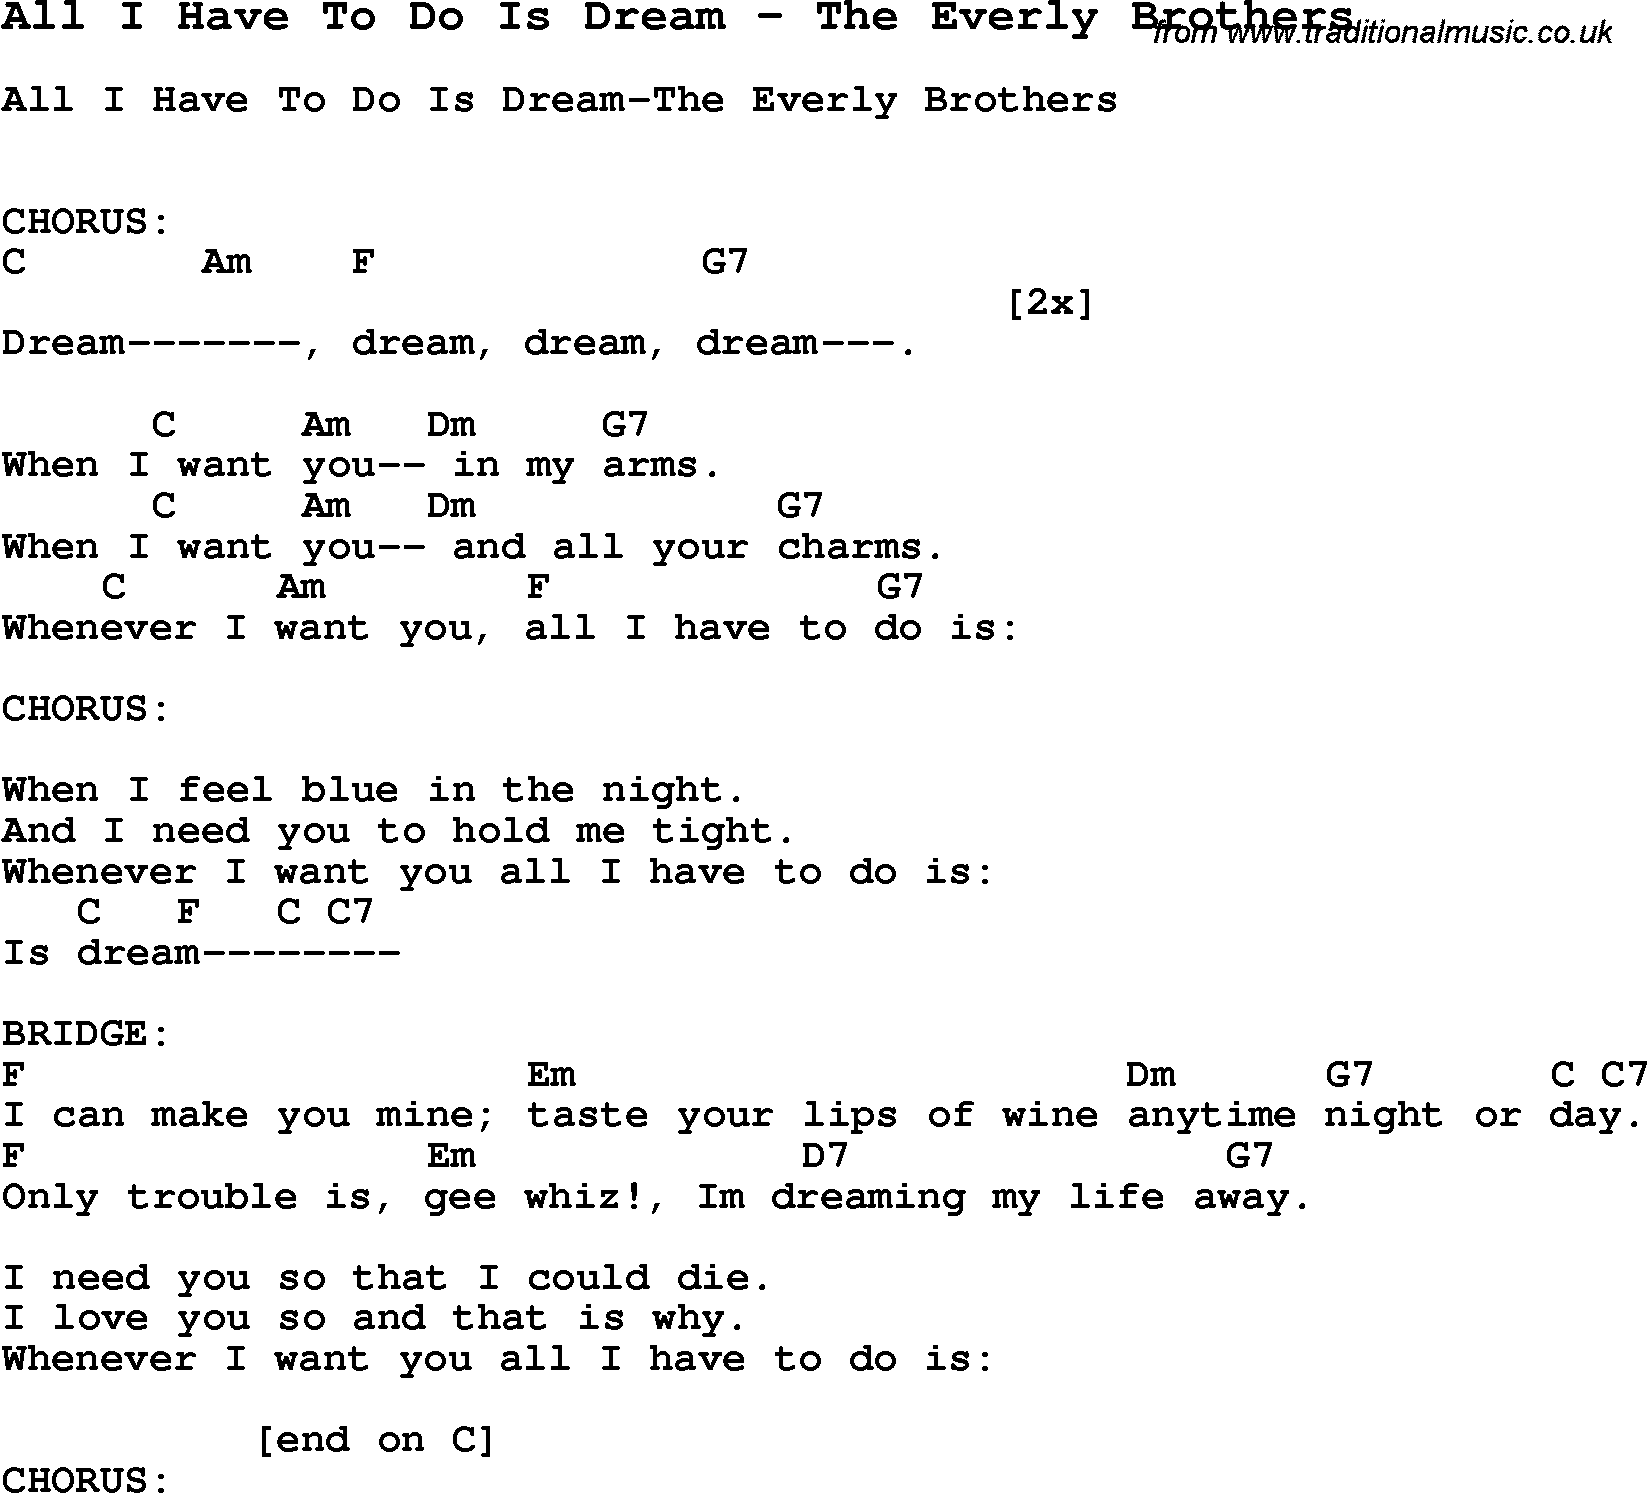 Song All I Have To Do Is Dream by The Everly Brothers, with lyrics for vocal performance and accompaniment chords for Ukulele, Guitar Banjo etc.